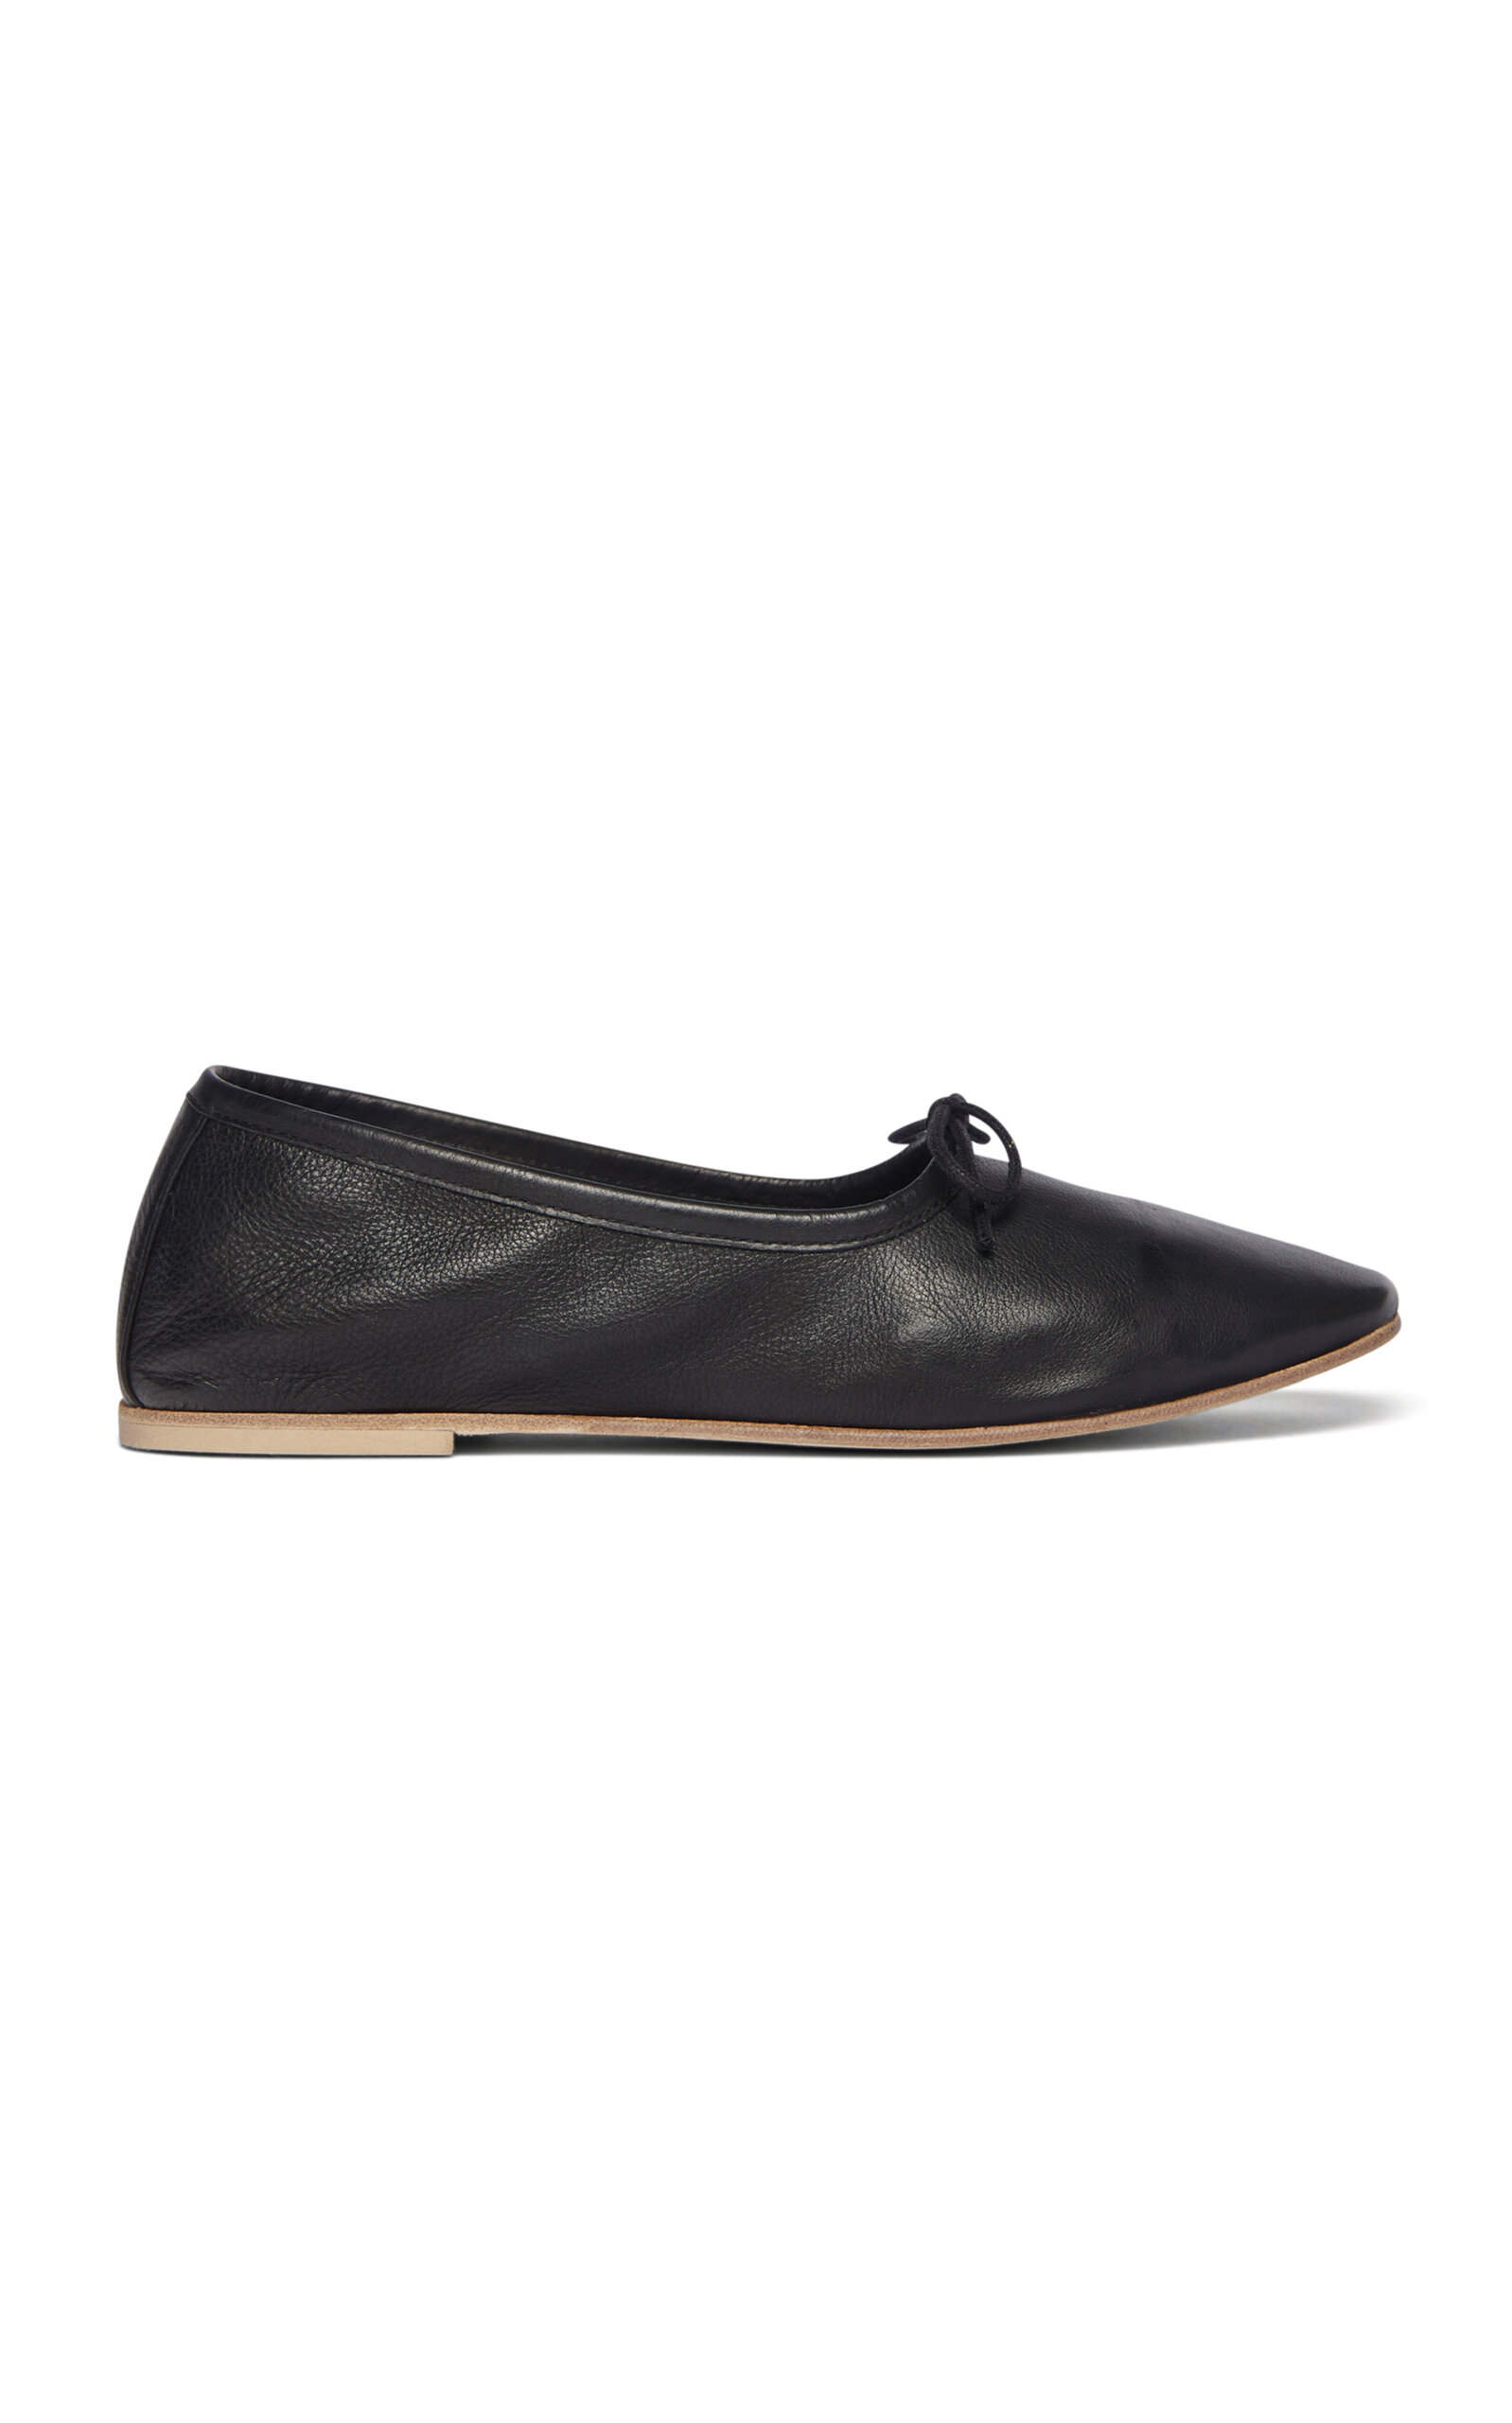 Freda Salvador Roma Leather Flats In Black